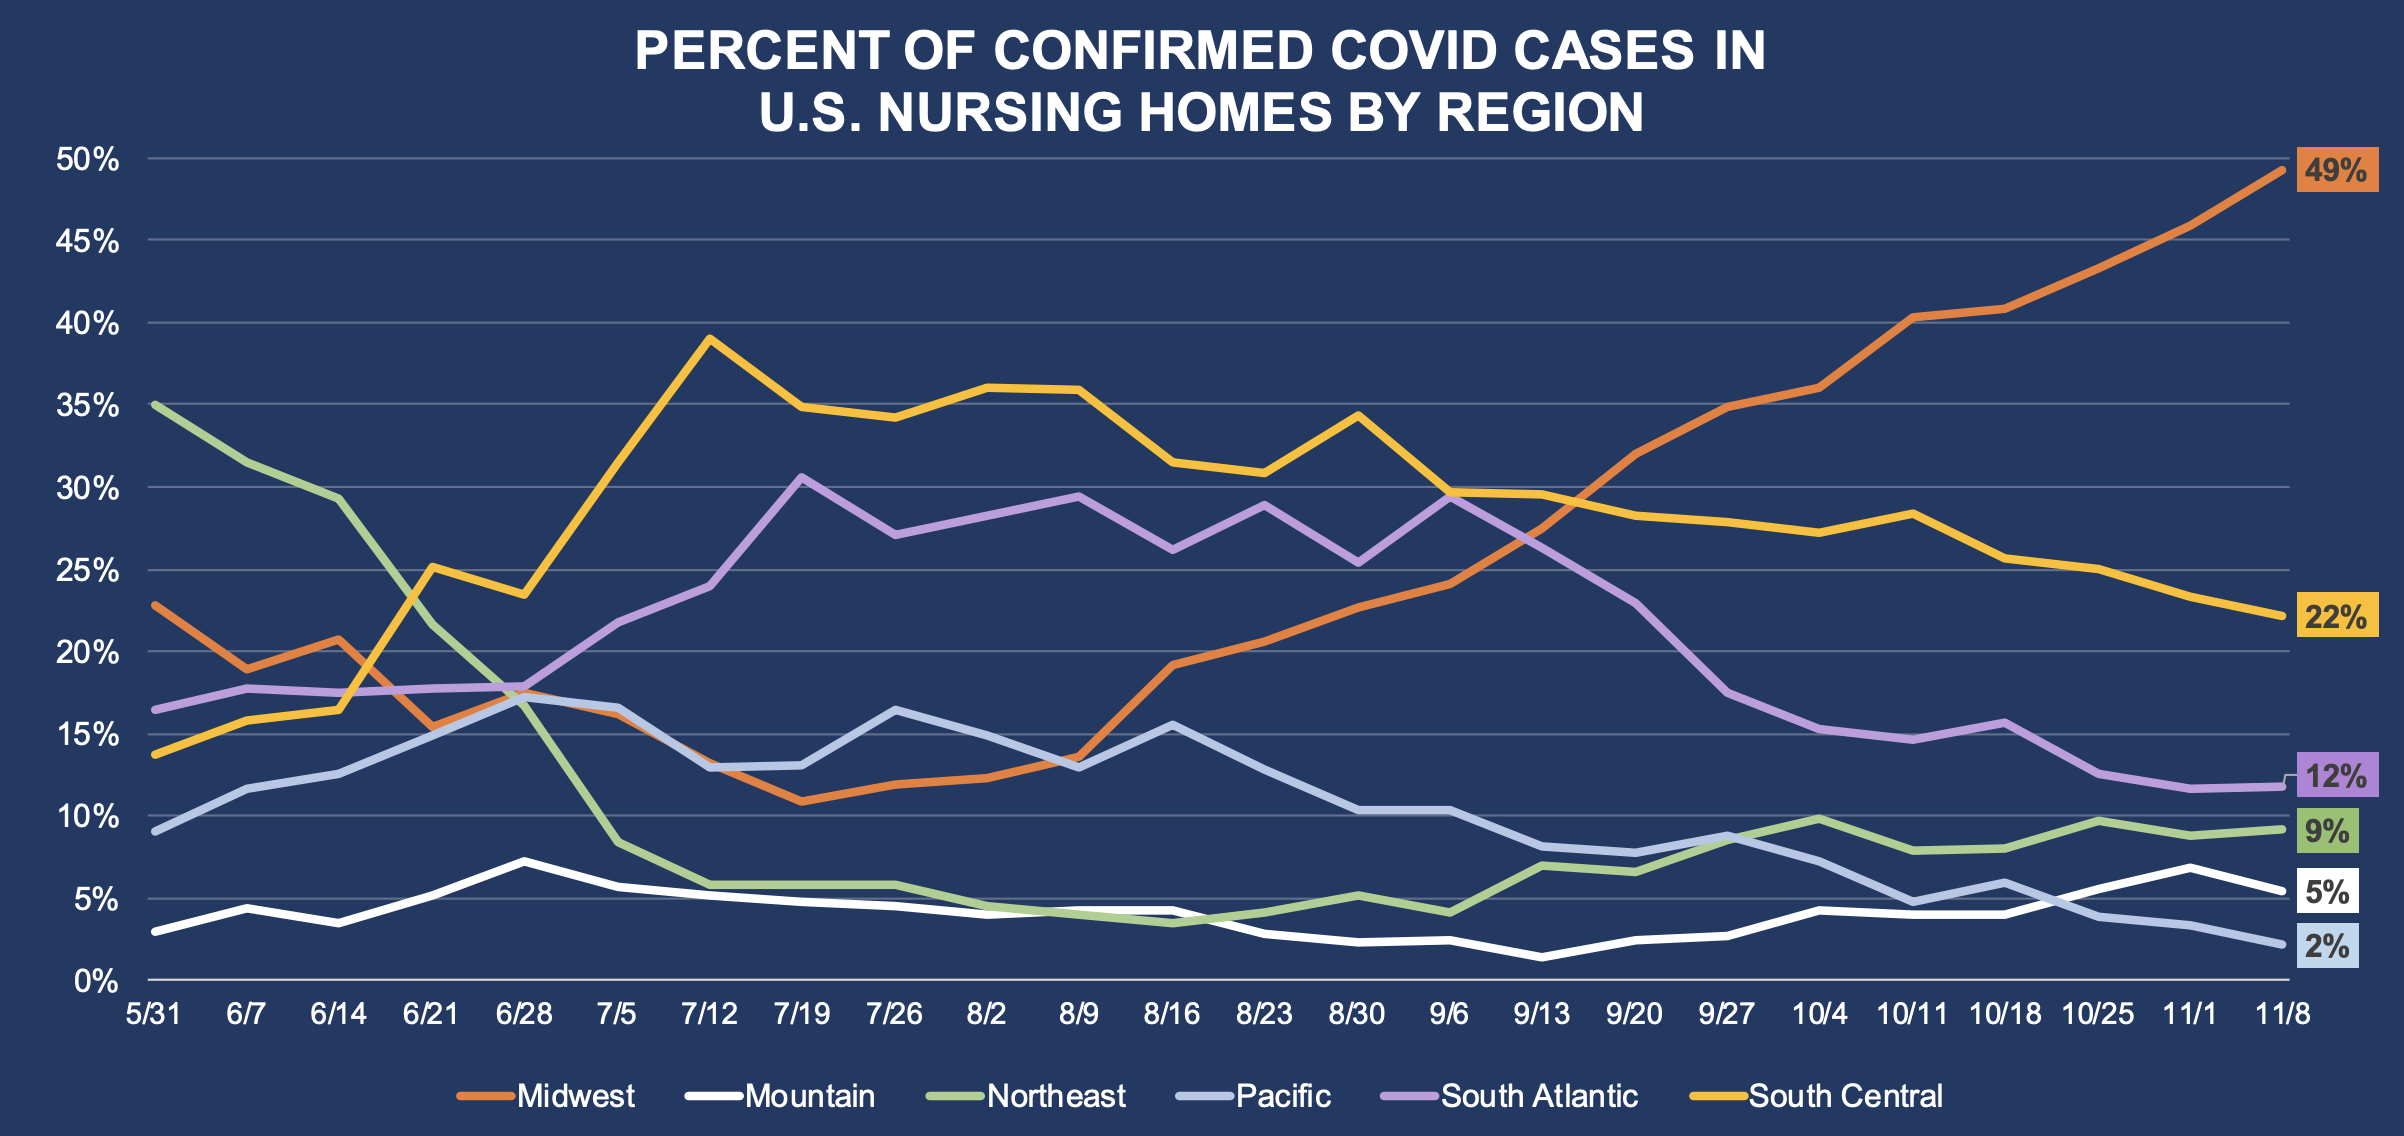 Percent Of Confirmed COVID Cases In U.S. Nursing Homes By Region